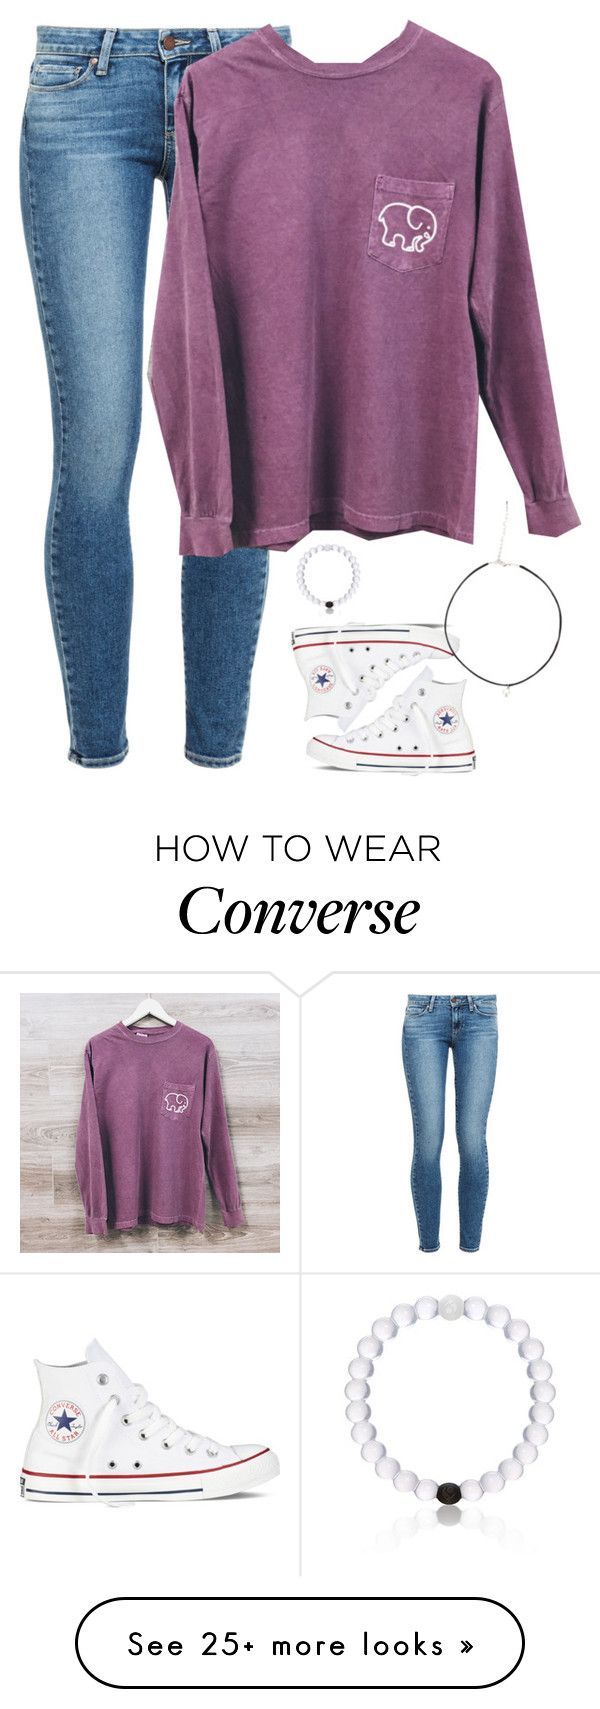 “Want this shirt!!~ hows the new setup?” by meljordrum on Polyvore featuring Converse, Paige Denim and Everest